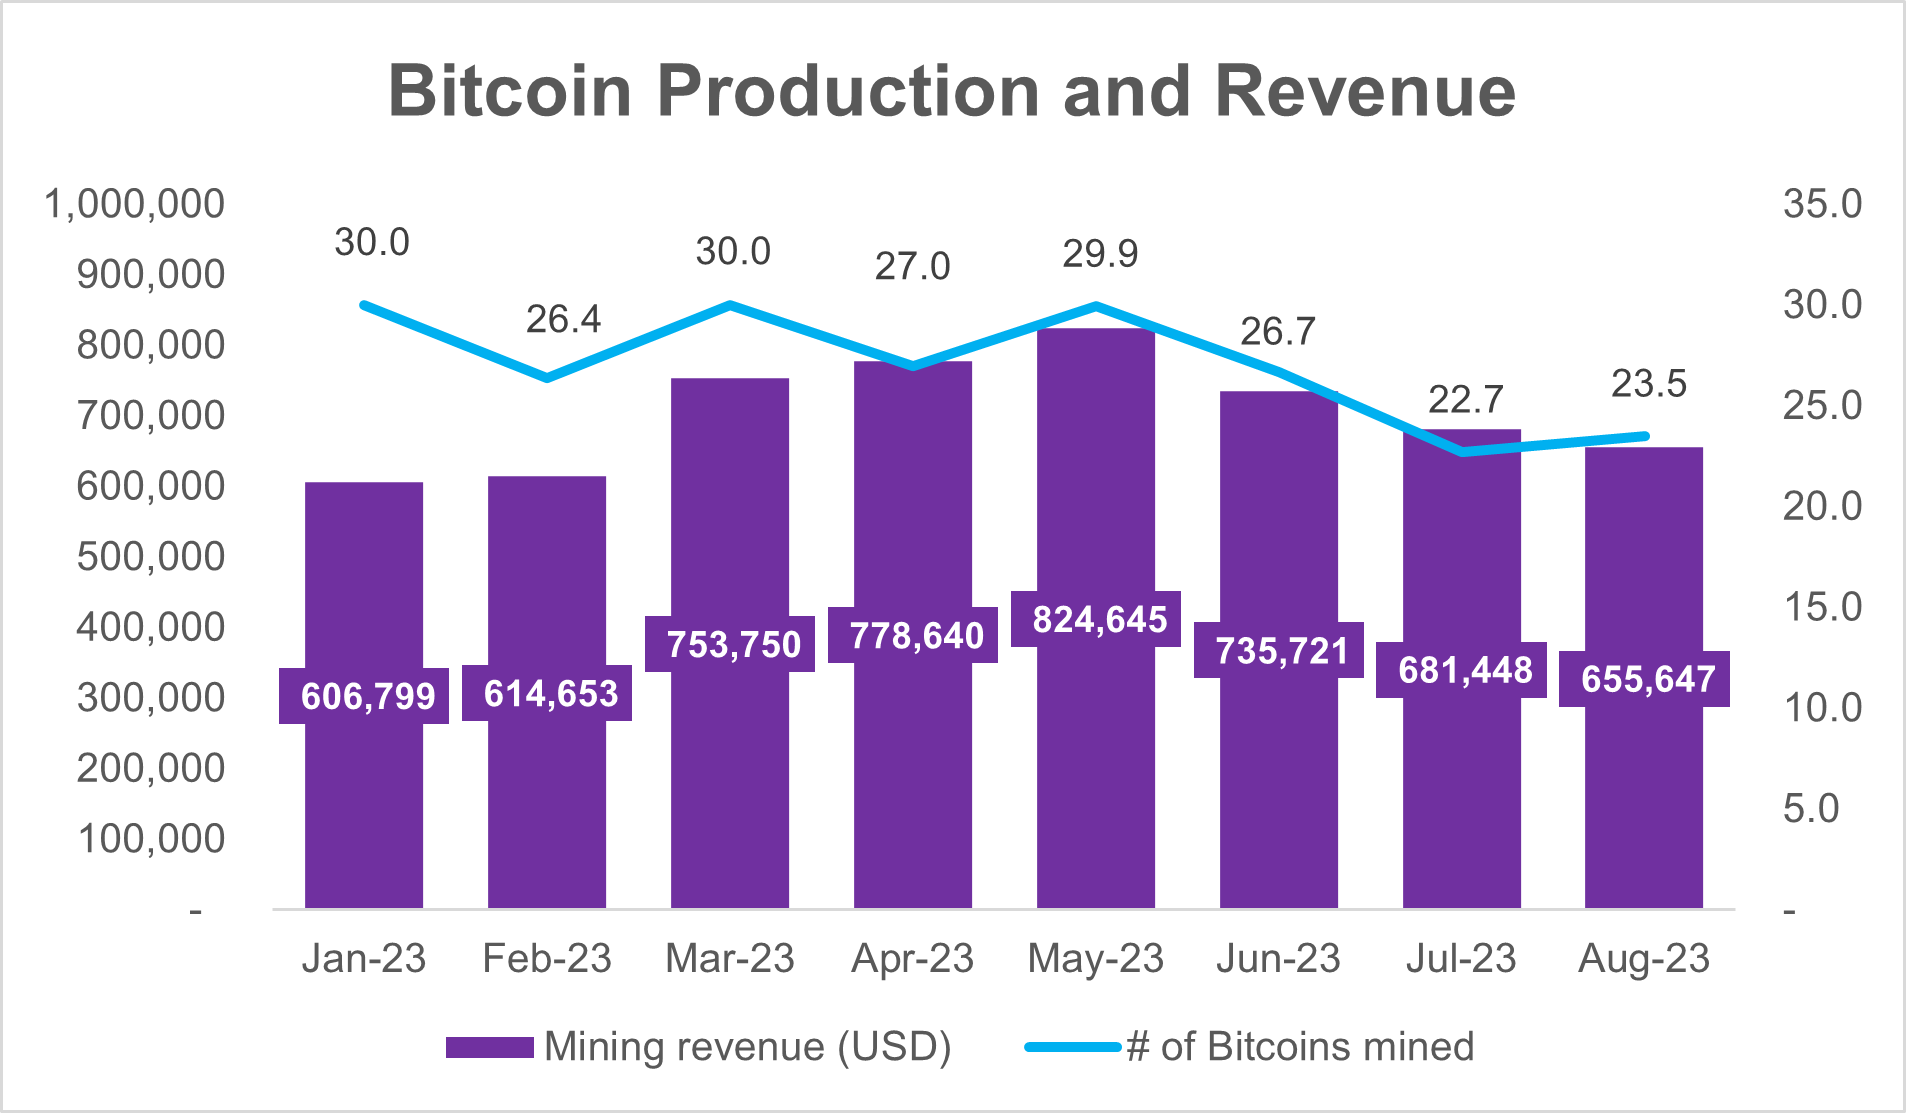 23.5 Bitcoins Mined and Revenue of $655,647 for August 2023